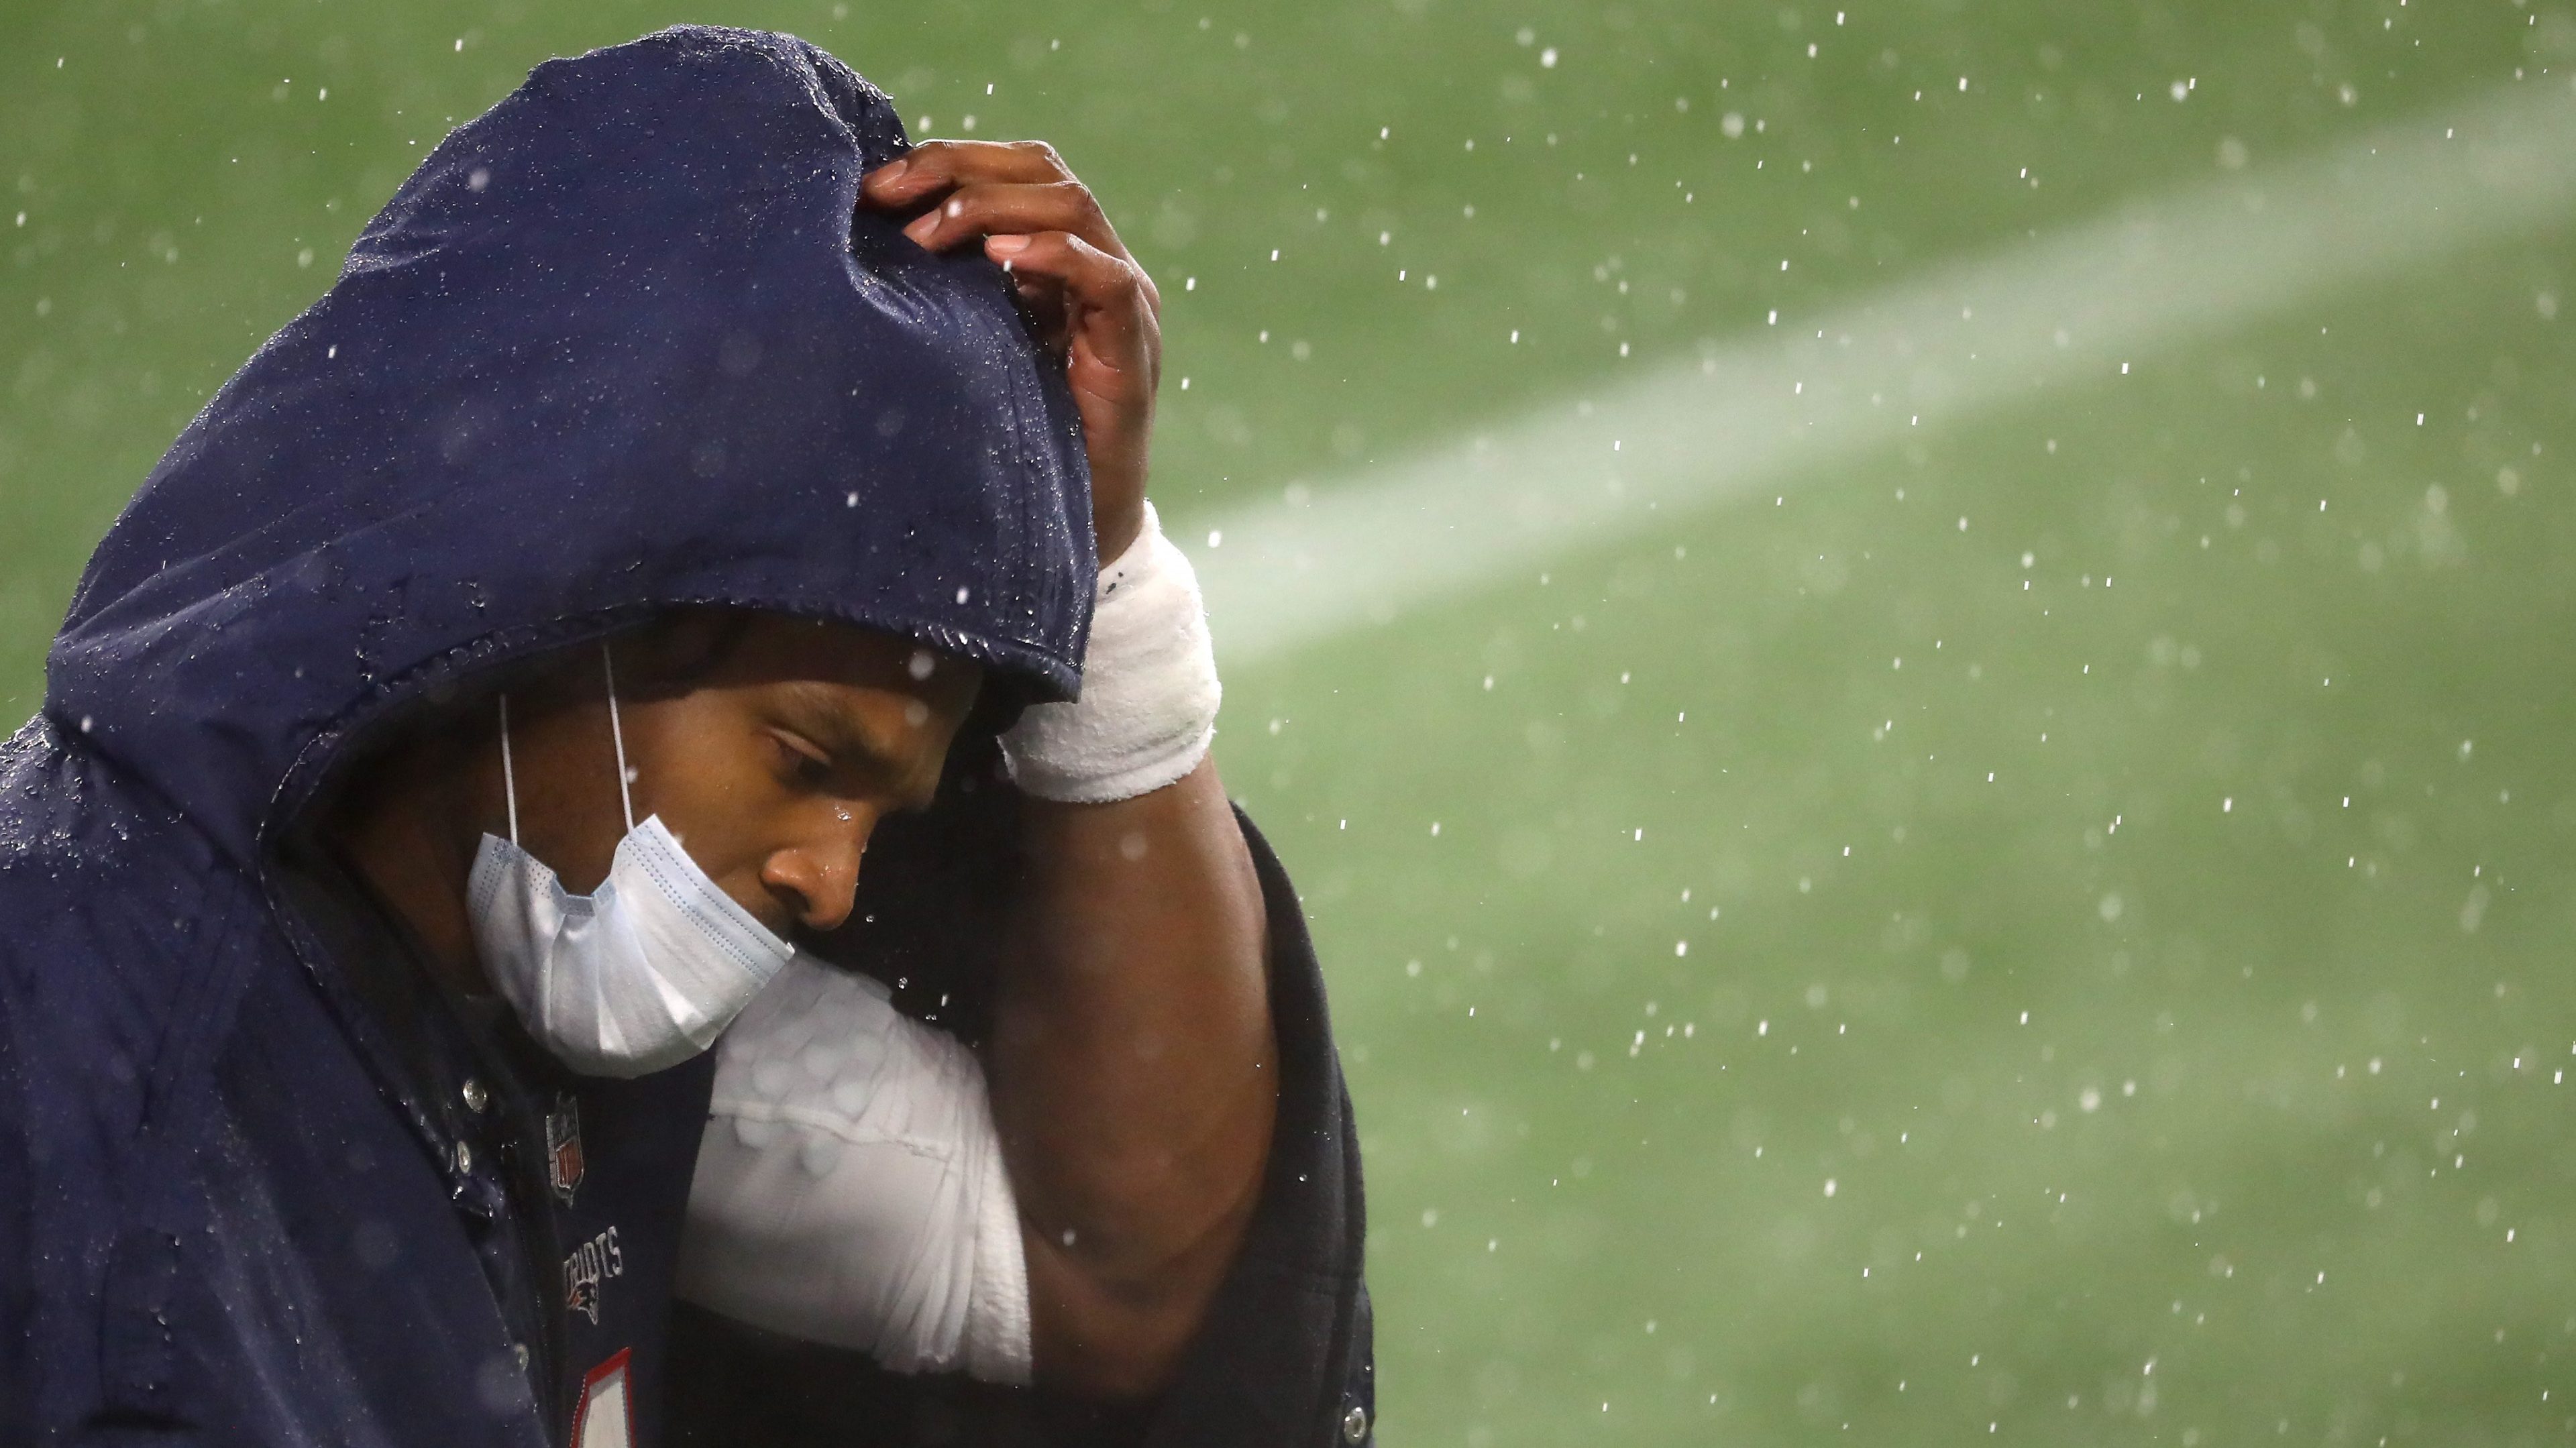 Cam Newton, quarterback, of the New England Patriots, looks on from the sideline wearing a mask and rain jacket during the game against the Baltimore Ravens at Gillette Stadium on November 15, 2020 in Foxborough, Massachusetts.